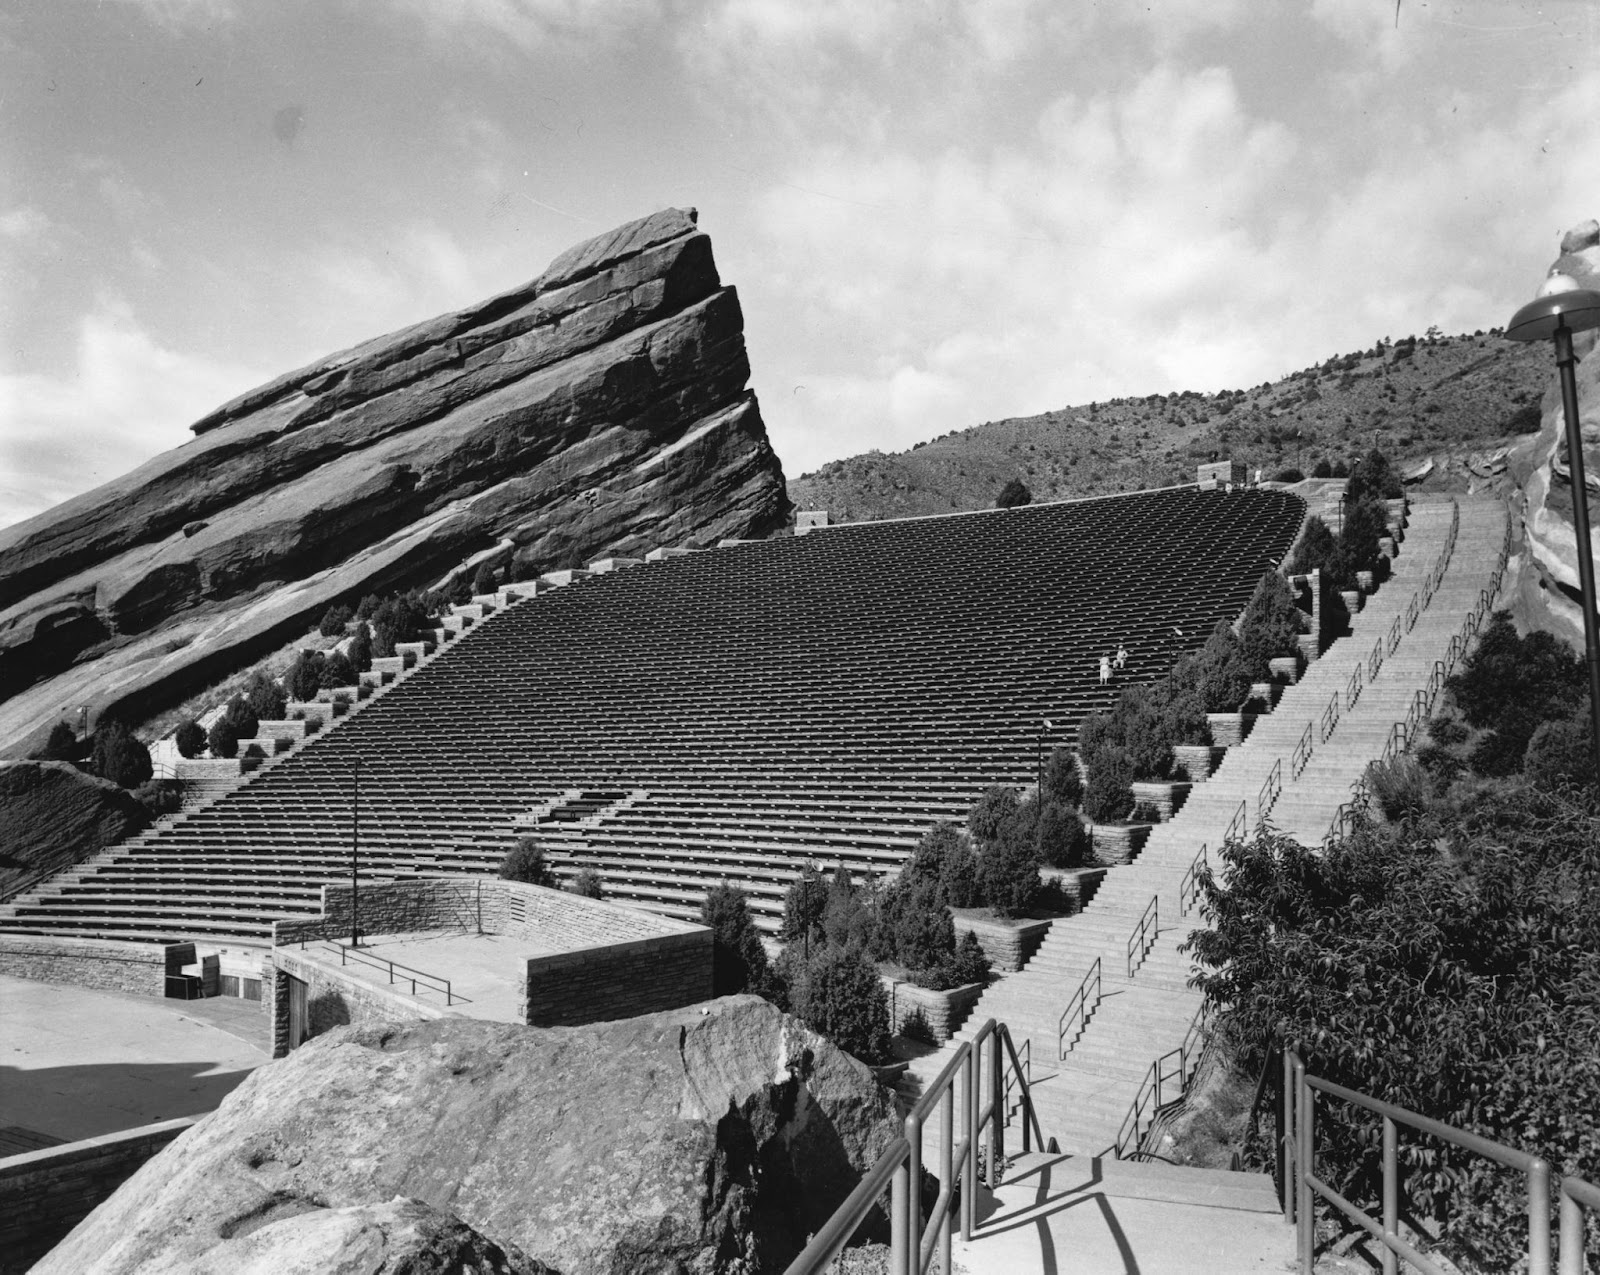 A black and white photo of Red Rocks Amphitheater, with the seating rising up among the rocks.